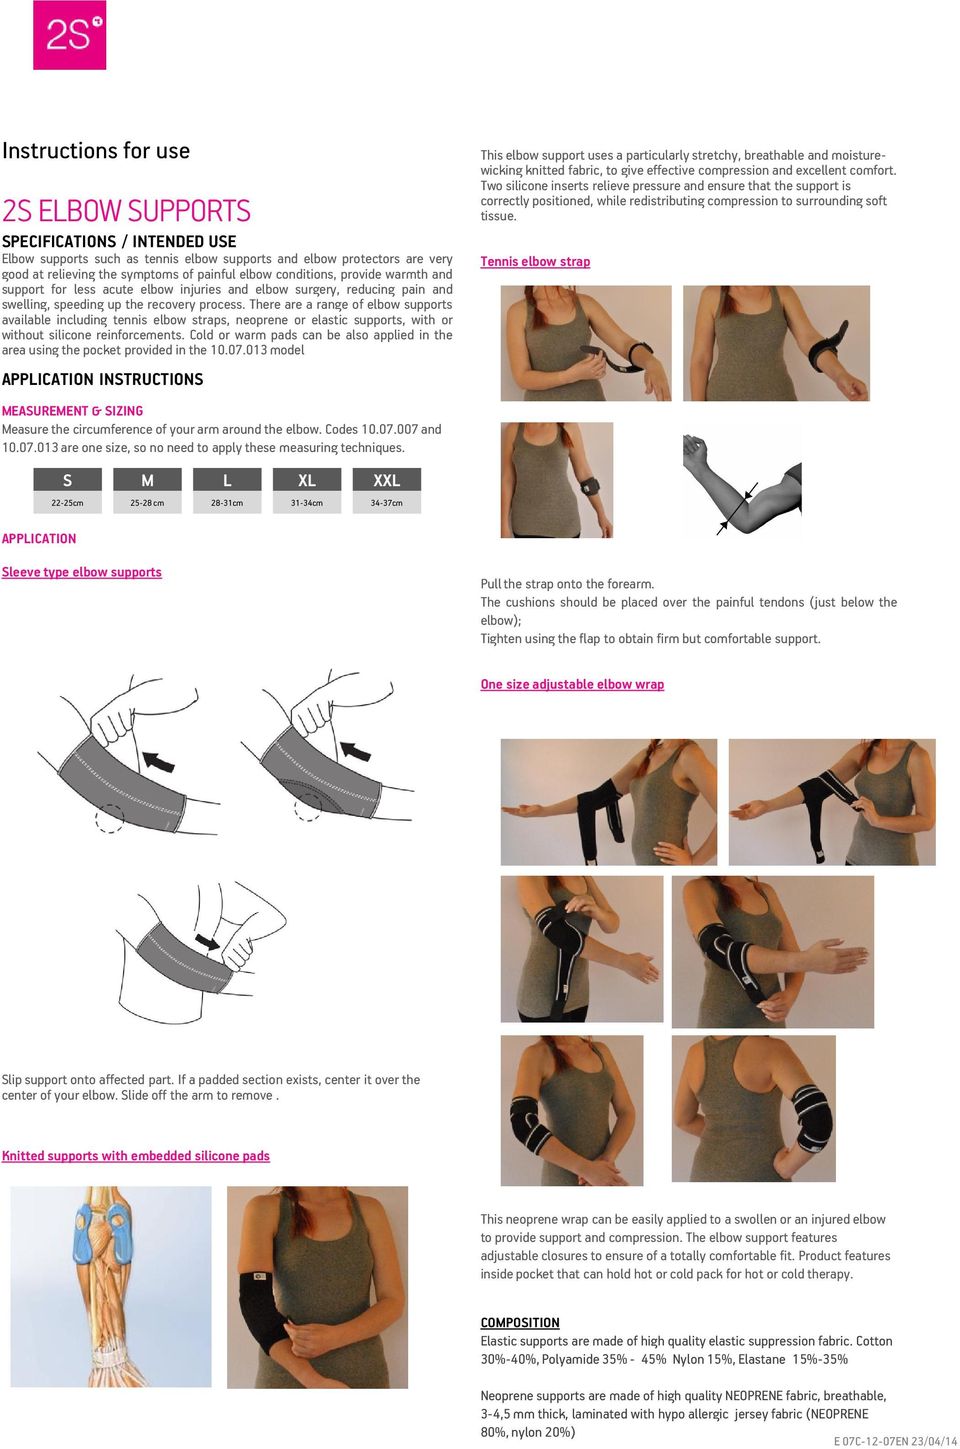 There are a range of elbow supports available including tennis elbow straps, neoprene or elastic supports, with or without silicone reinforcements.